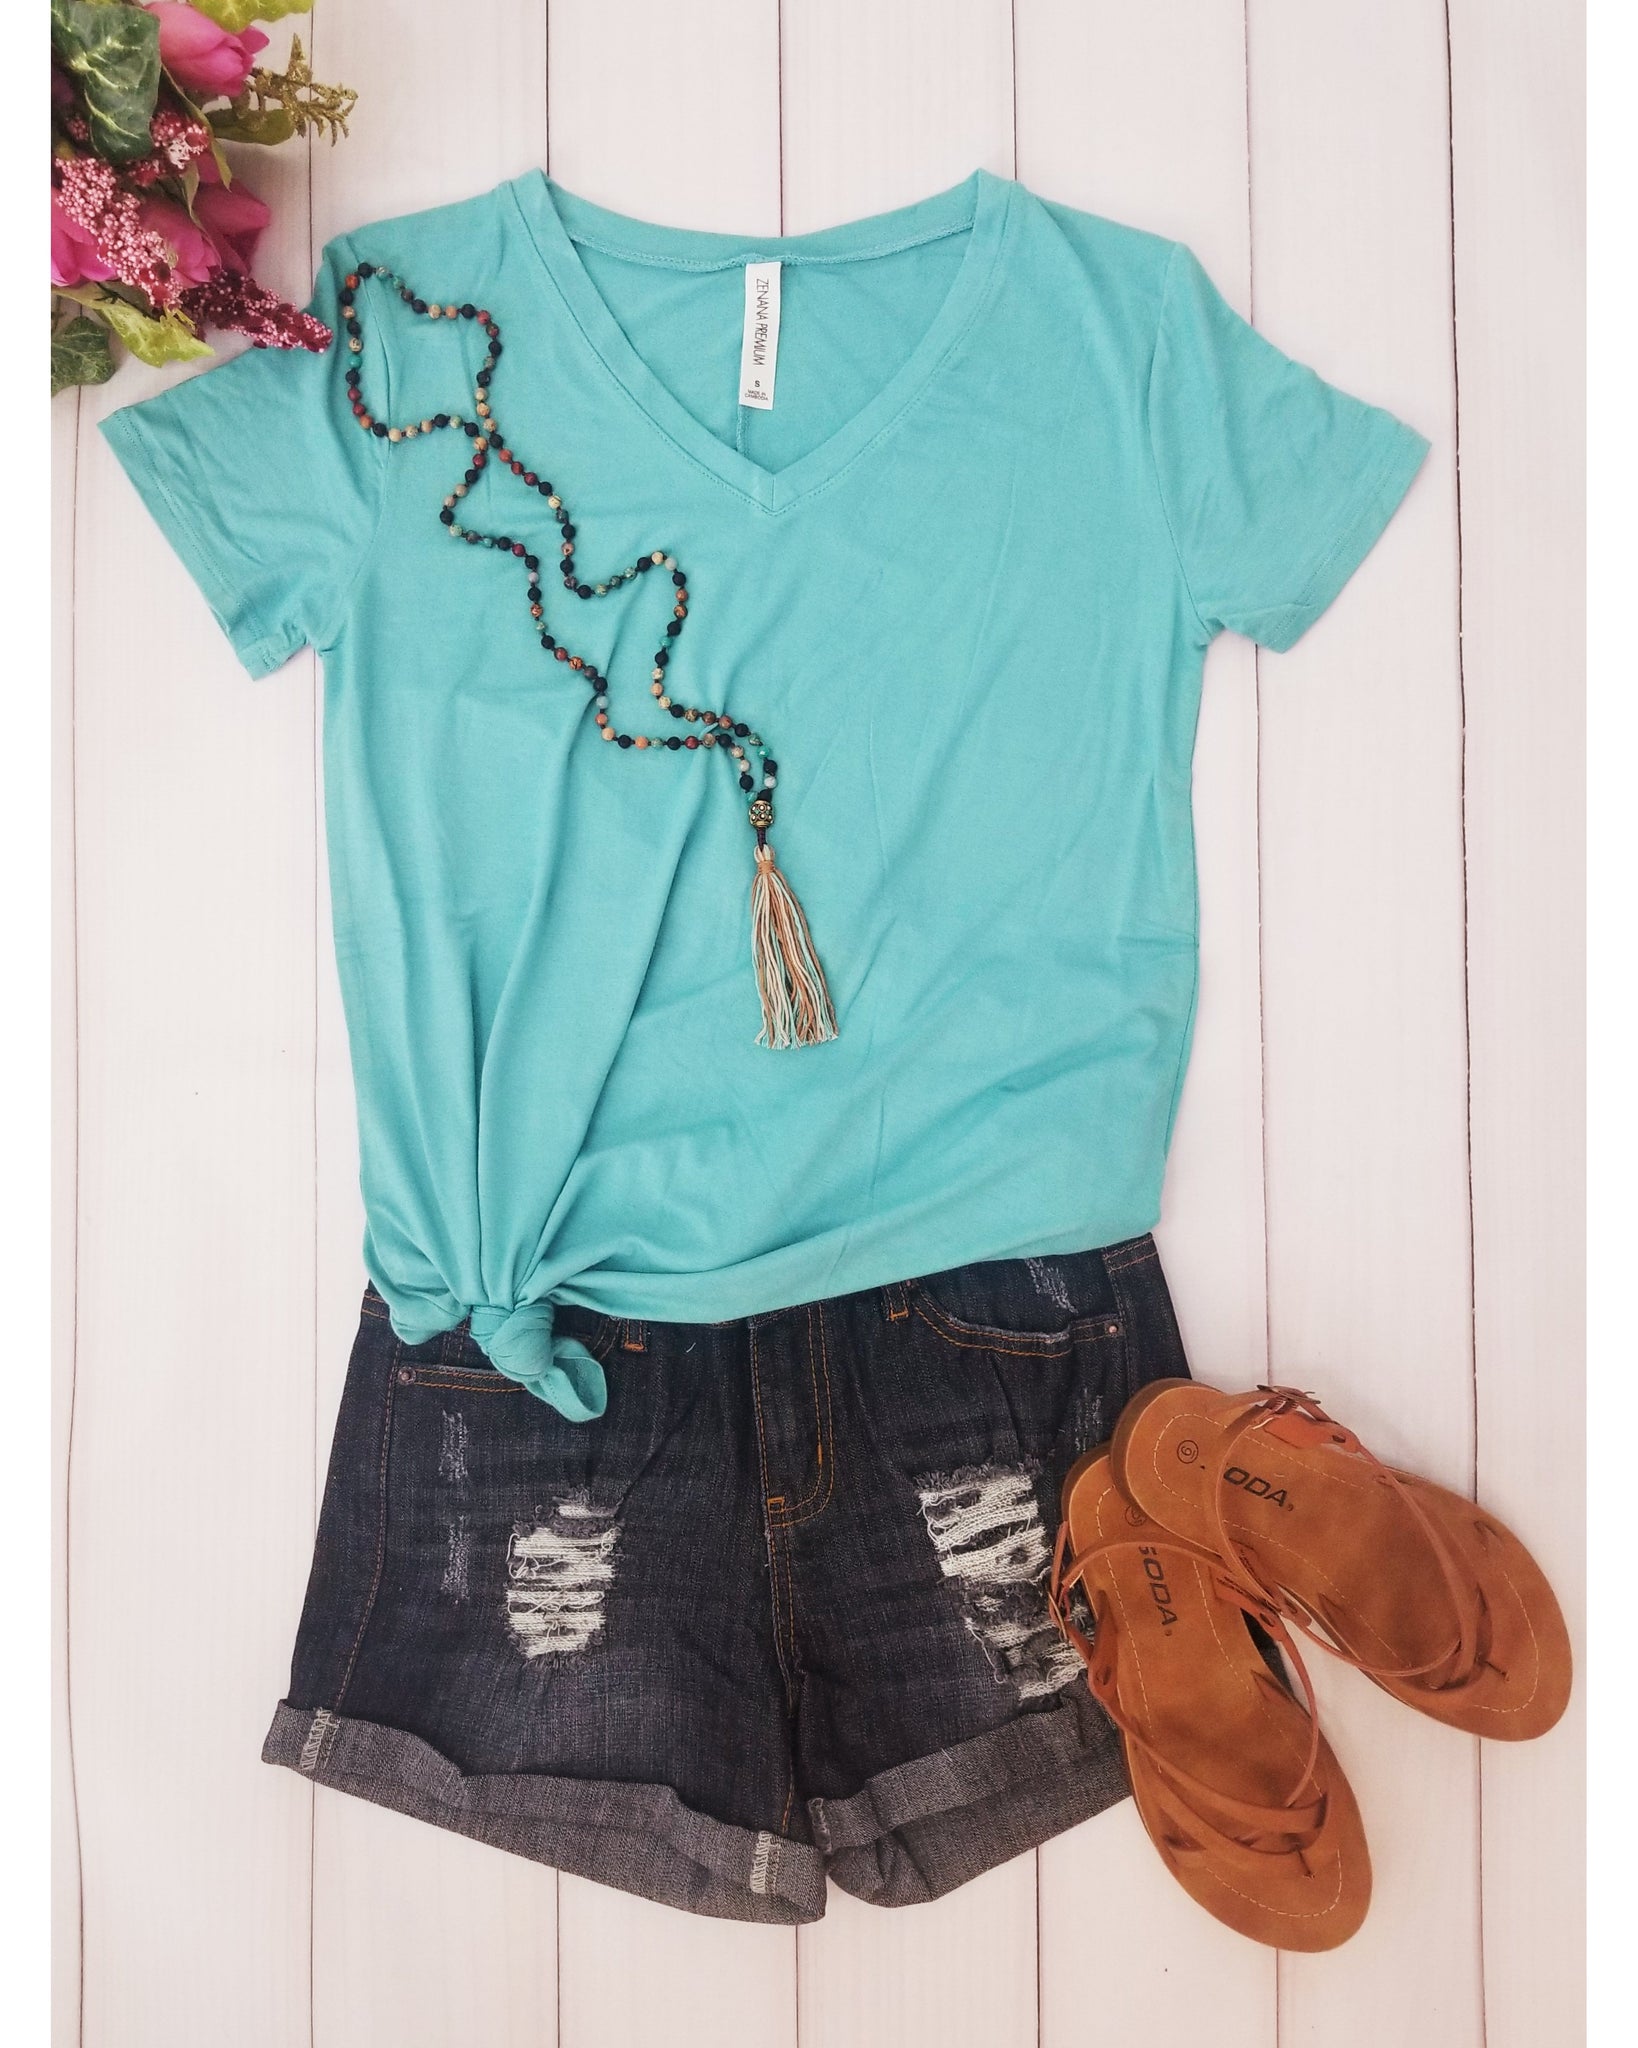 Keeping It Comfortable Short Sleeve V-Neck T-Shirt Top in Blue Mint - Essentially Elegant 